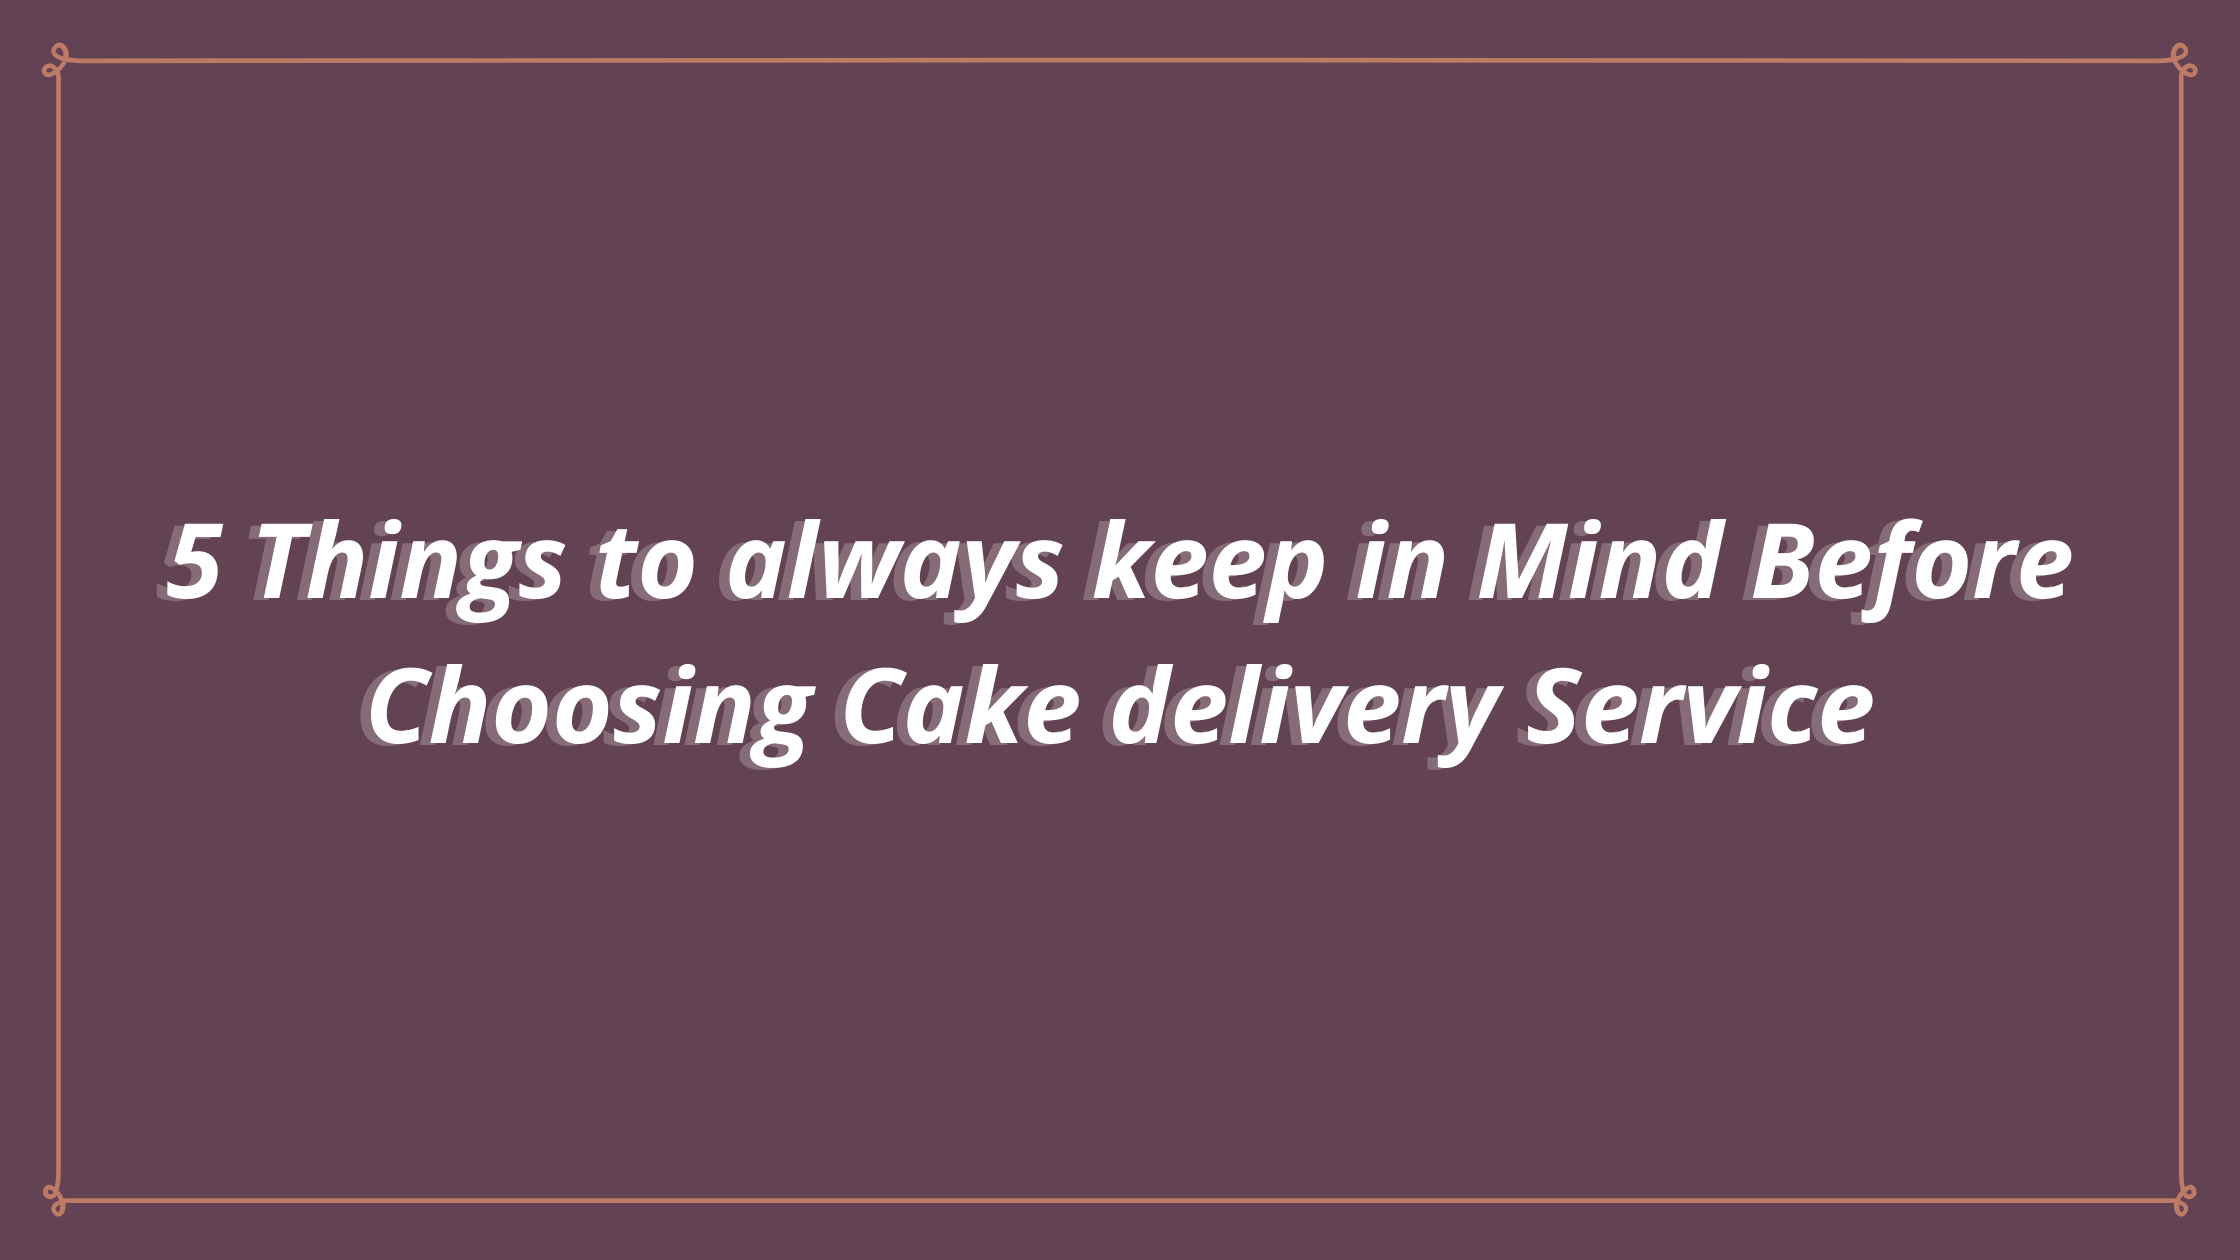 5 Things to always keep in Mind Before Choosing Cake delivery Service